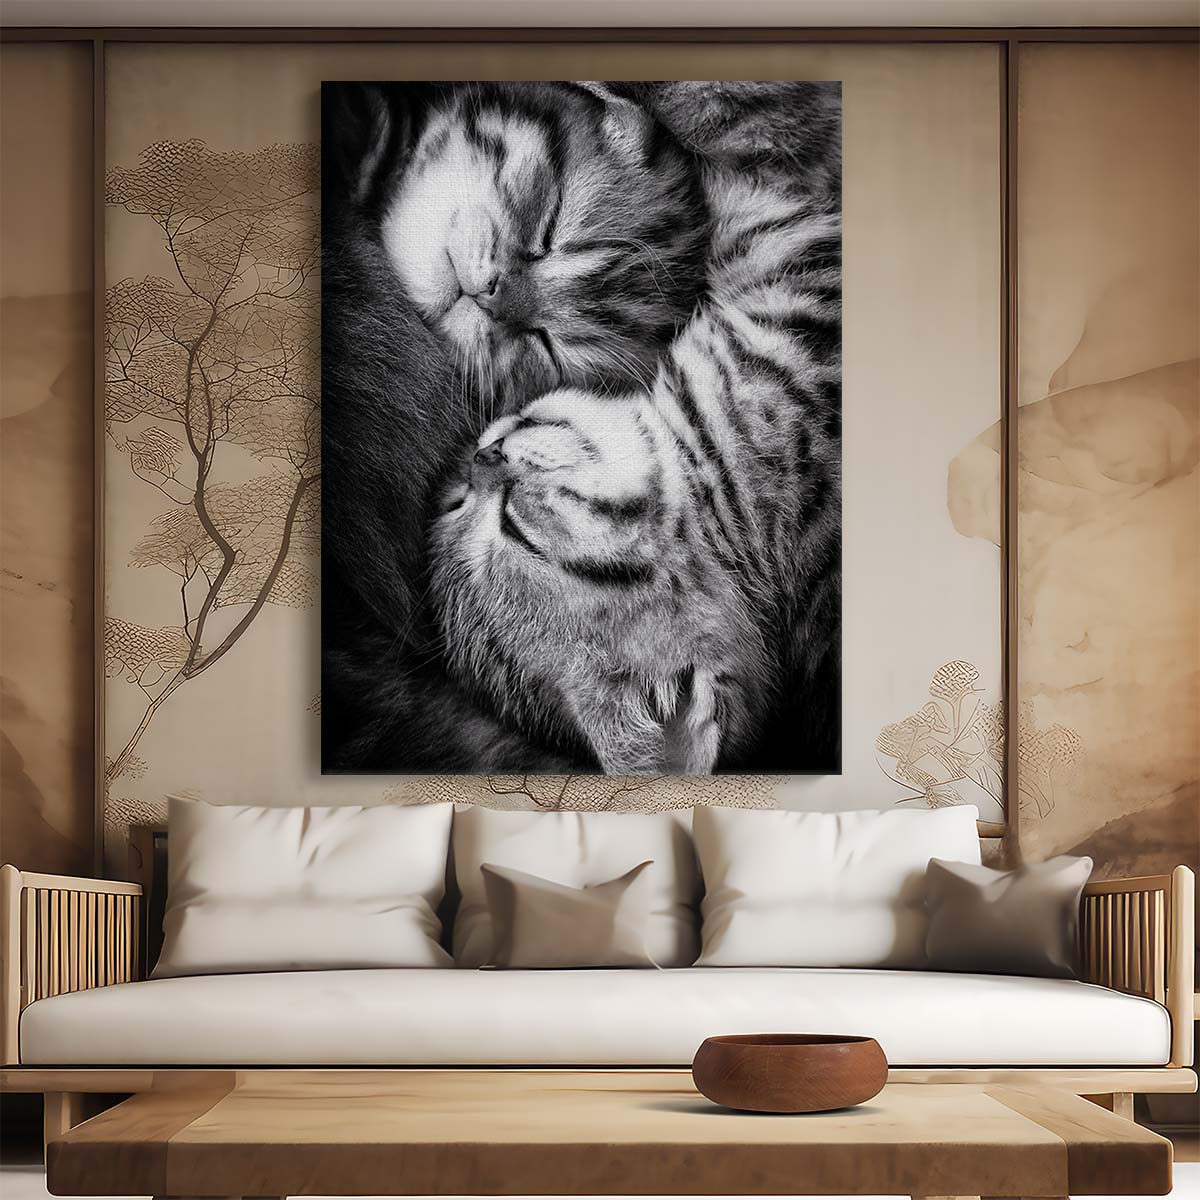 Yin Yang Sleeping Kittens Monochrome Photography Wall Art by Luxuriance Designs, made in USA